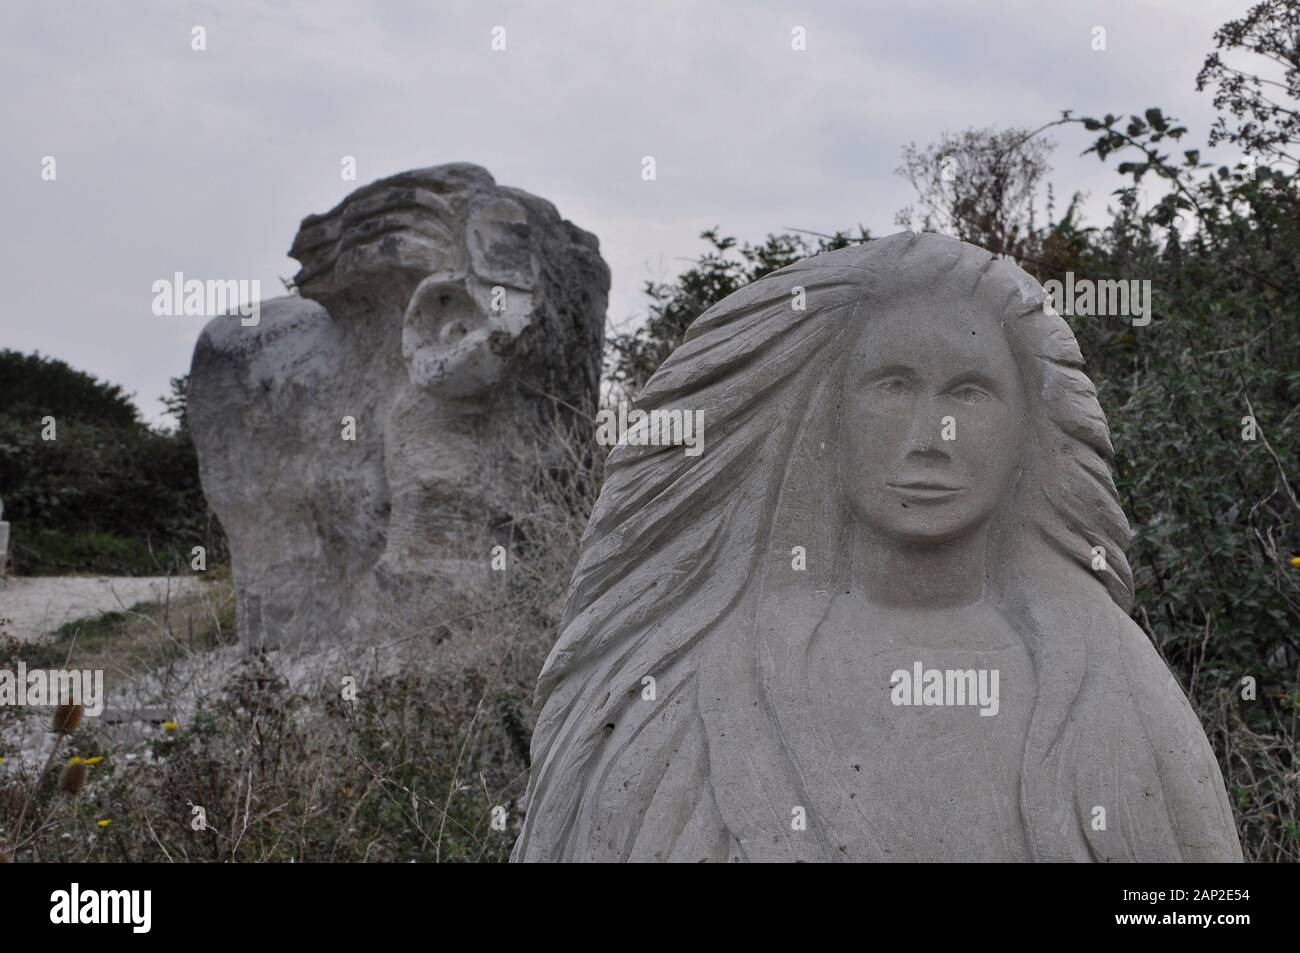 Stone sculpture of Lady with flowing hair in the Tout Qarry sculpture park on Portland bill in Dorset, UK Stock Photo